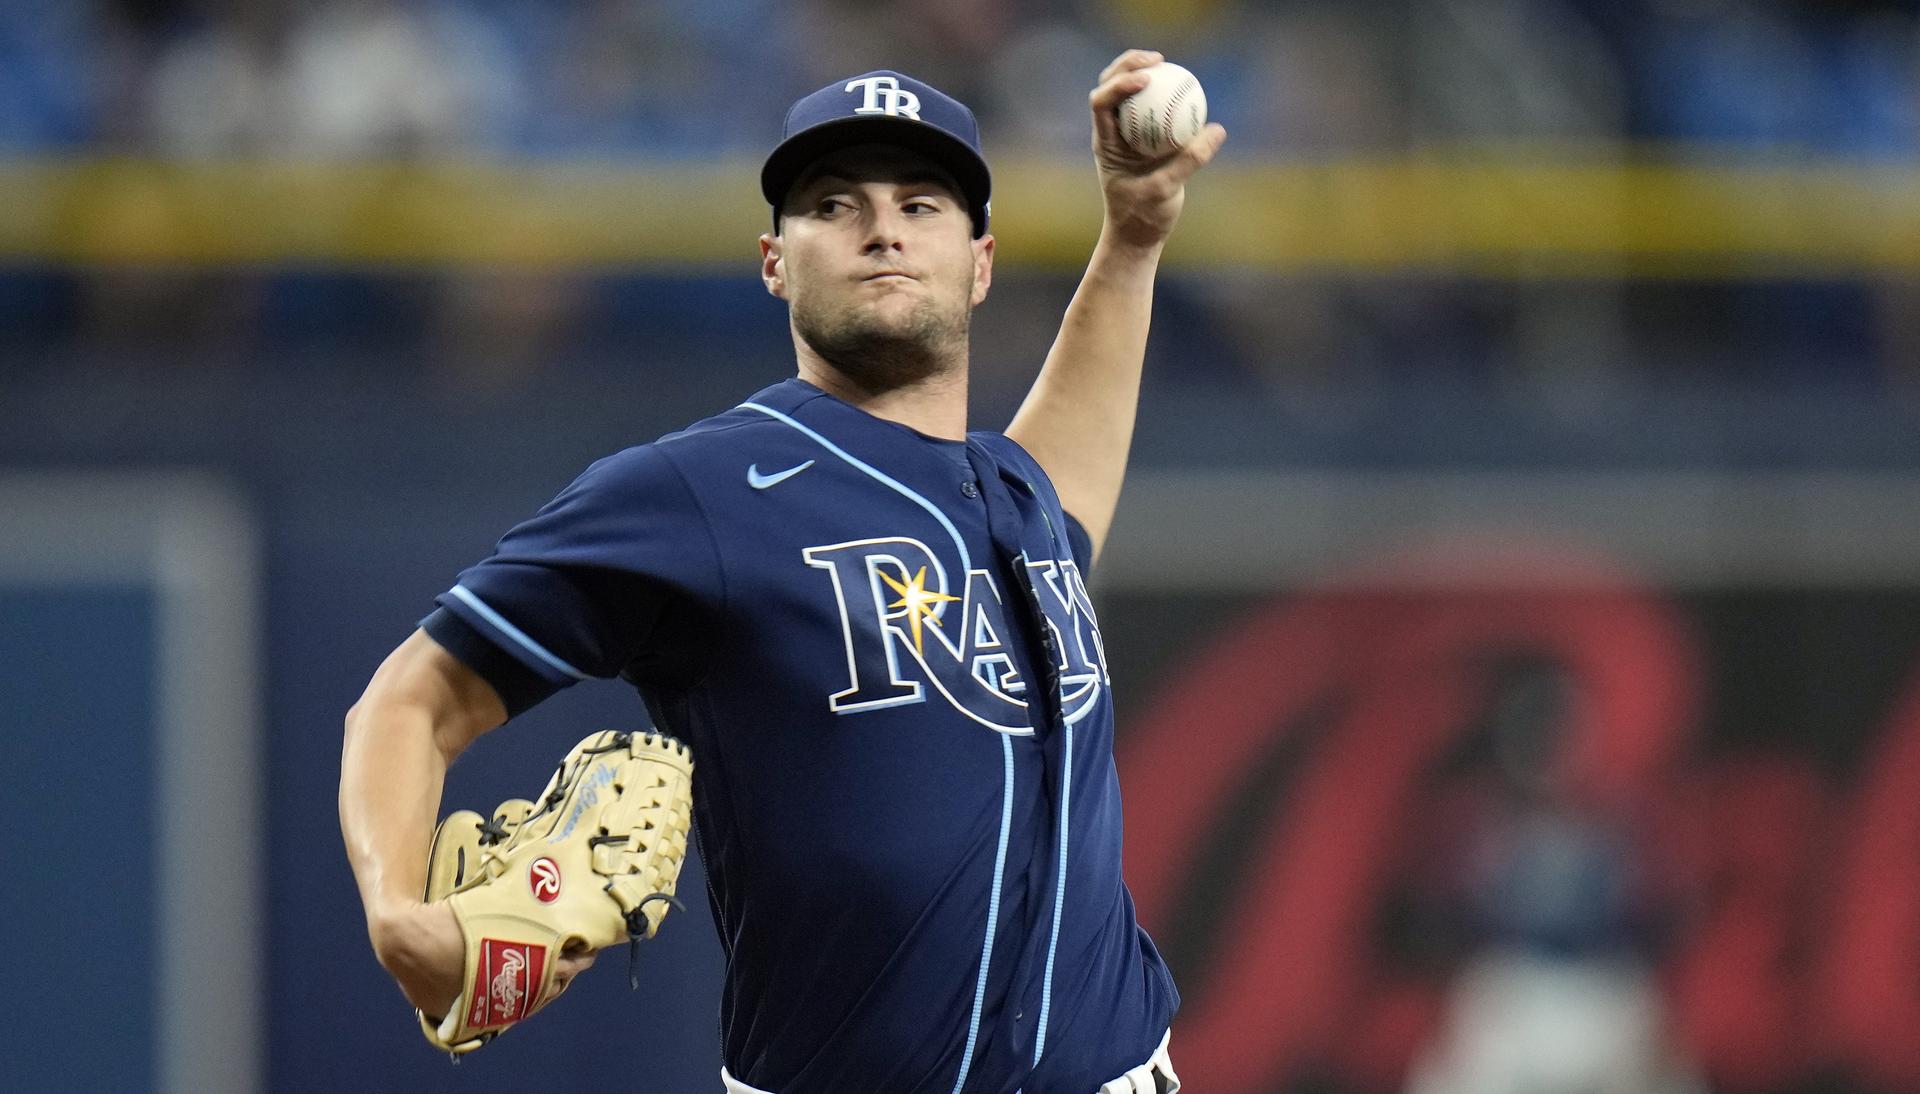 Rays vs. Orioles Player Prop Bets Today - July 26, 2022: Expect a Dominant Day on the Mound for McClanahan